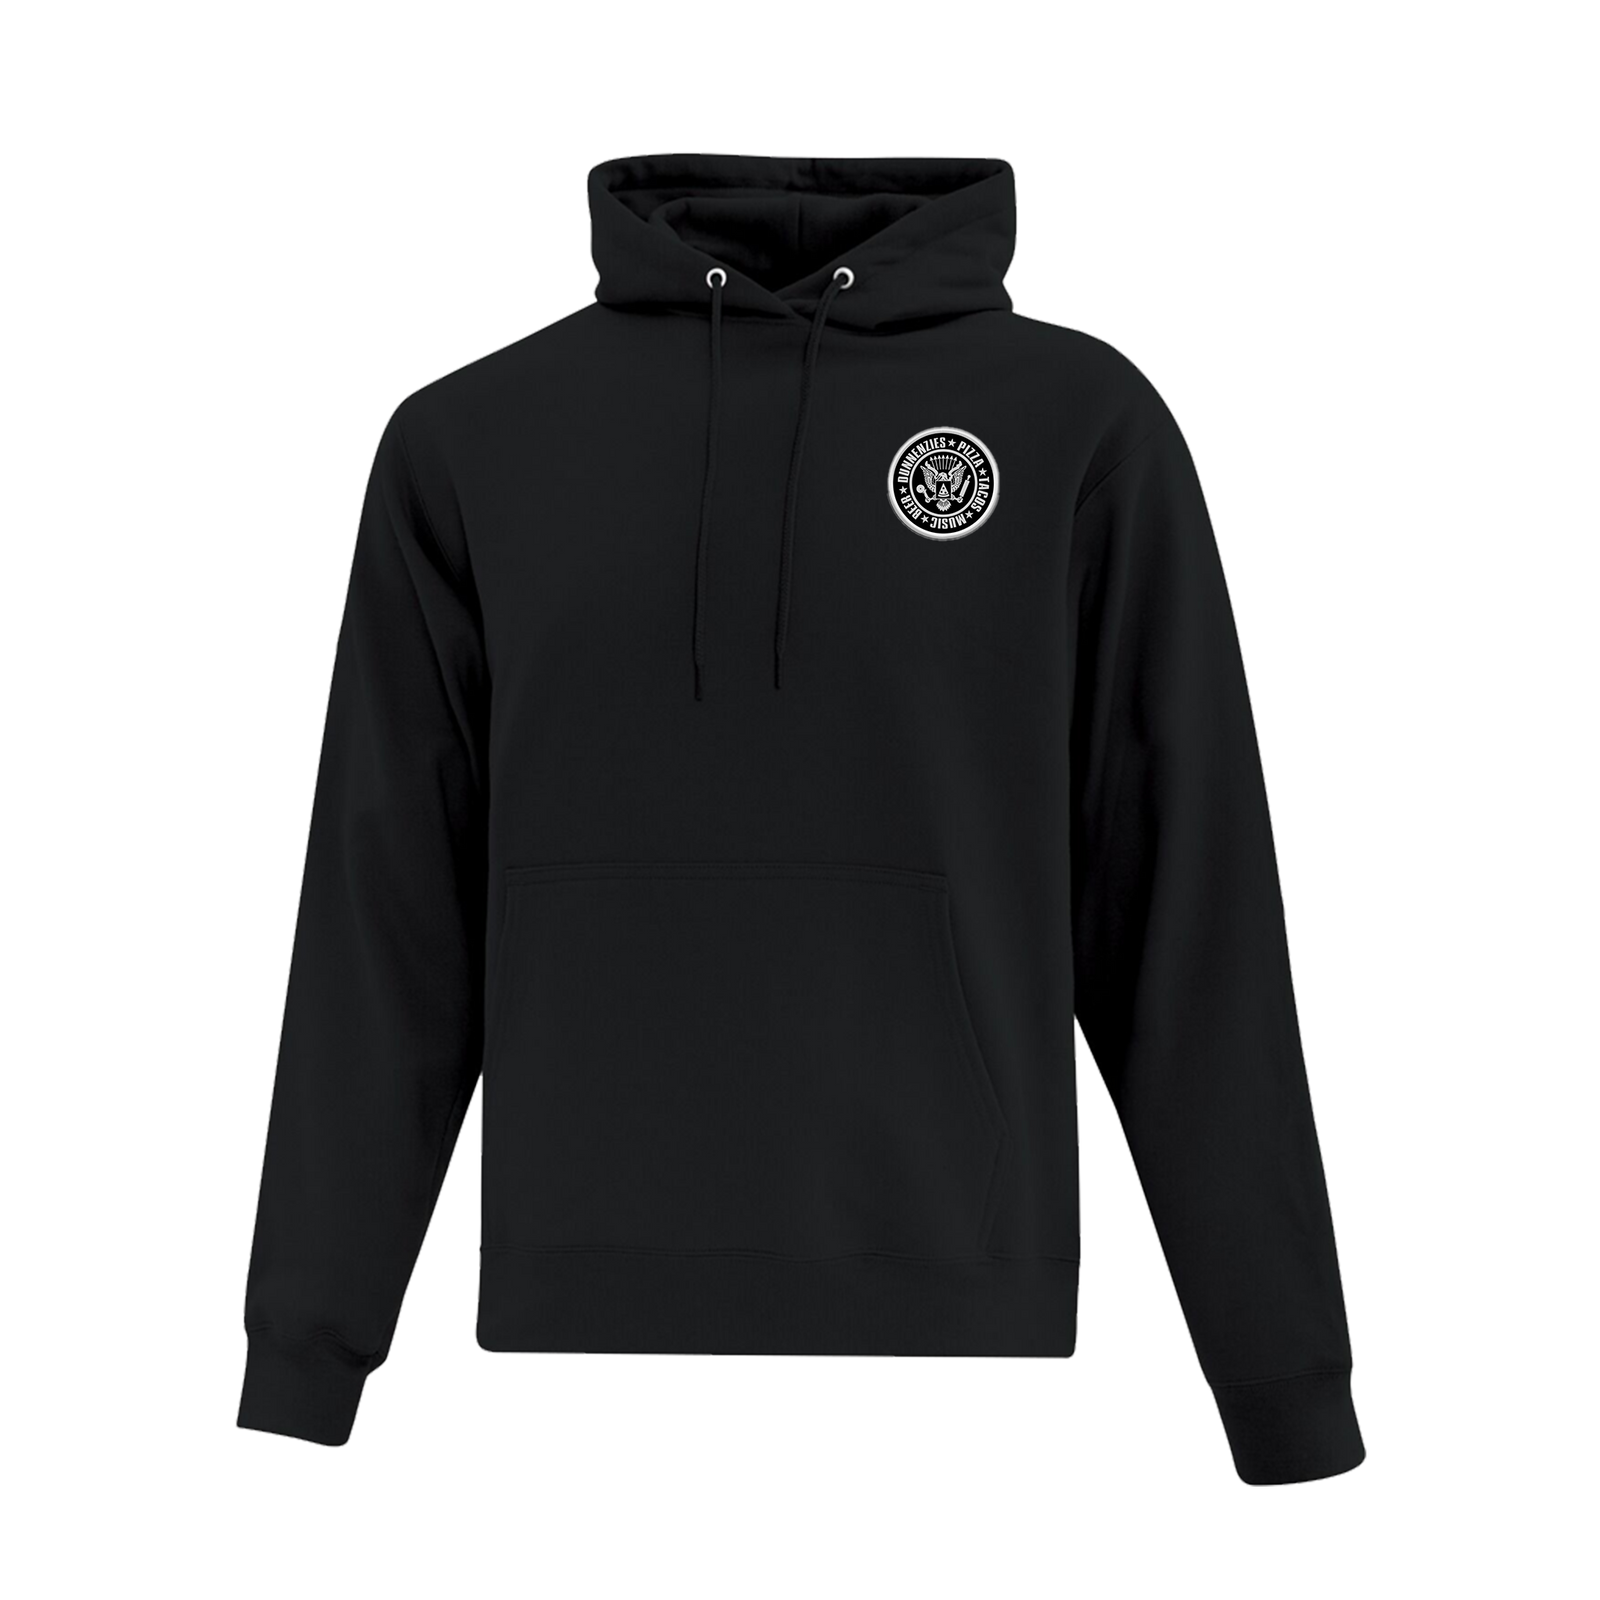 Dunnenzies Refelections Apparel Hoodie - Unisex Sizing XS-4XL - Black